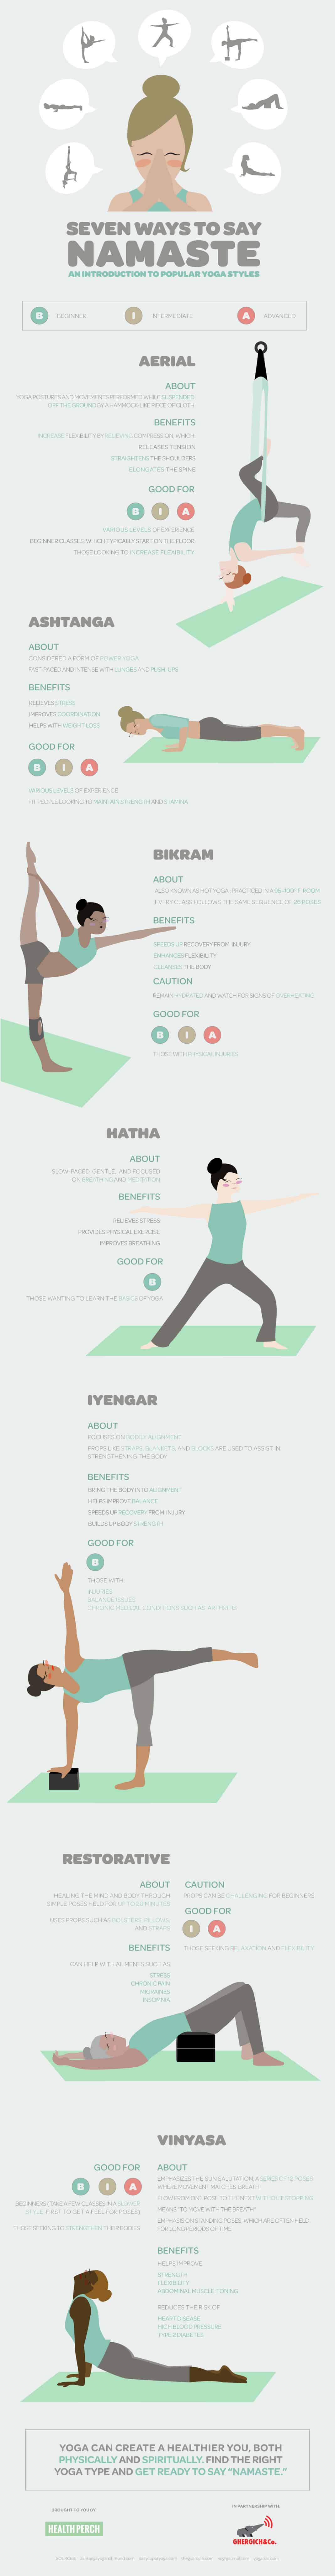 Seven Ways To Say Namaste - An Introduction To Popular Yoga Styles